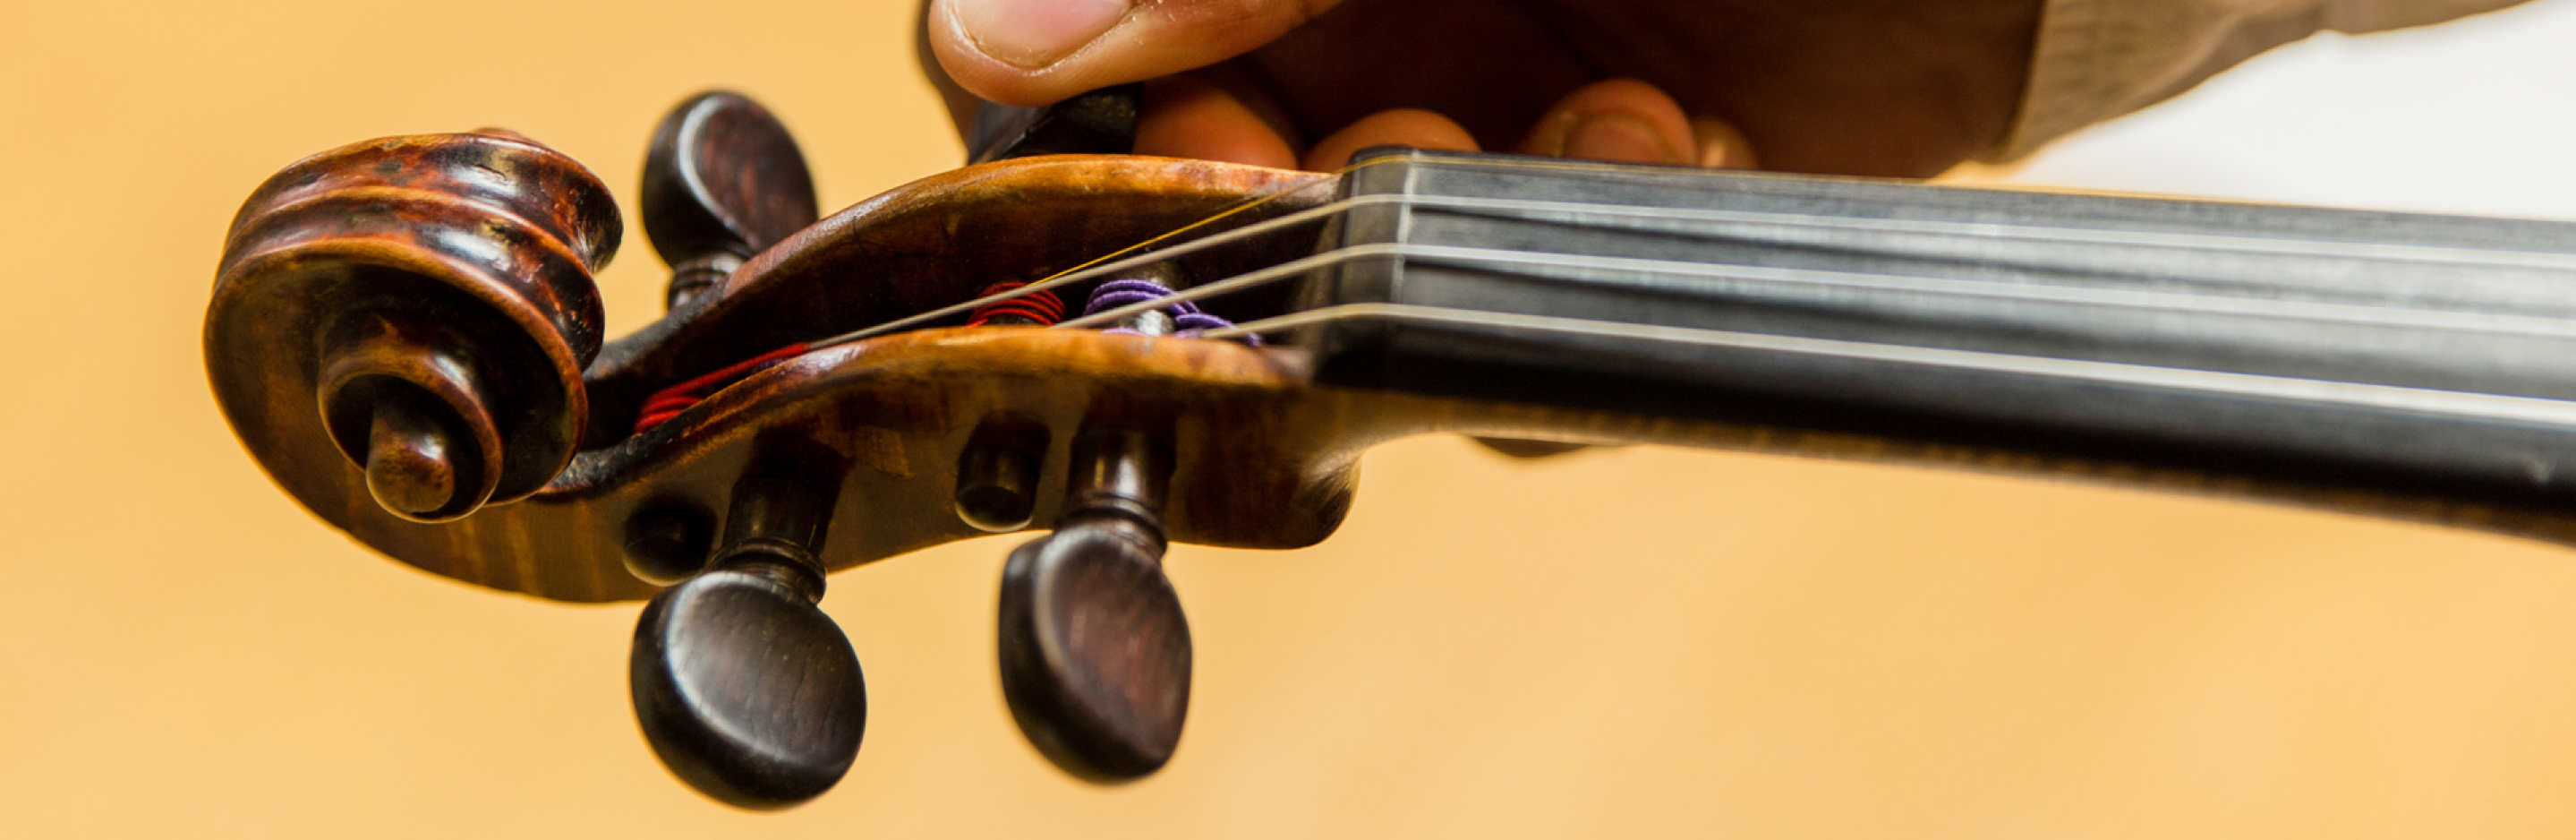 Amati specialists travel the world valuing instruments. We also provide valuations online.